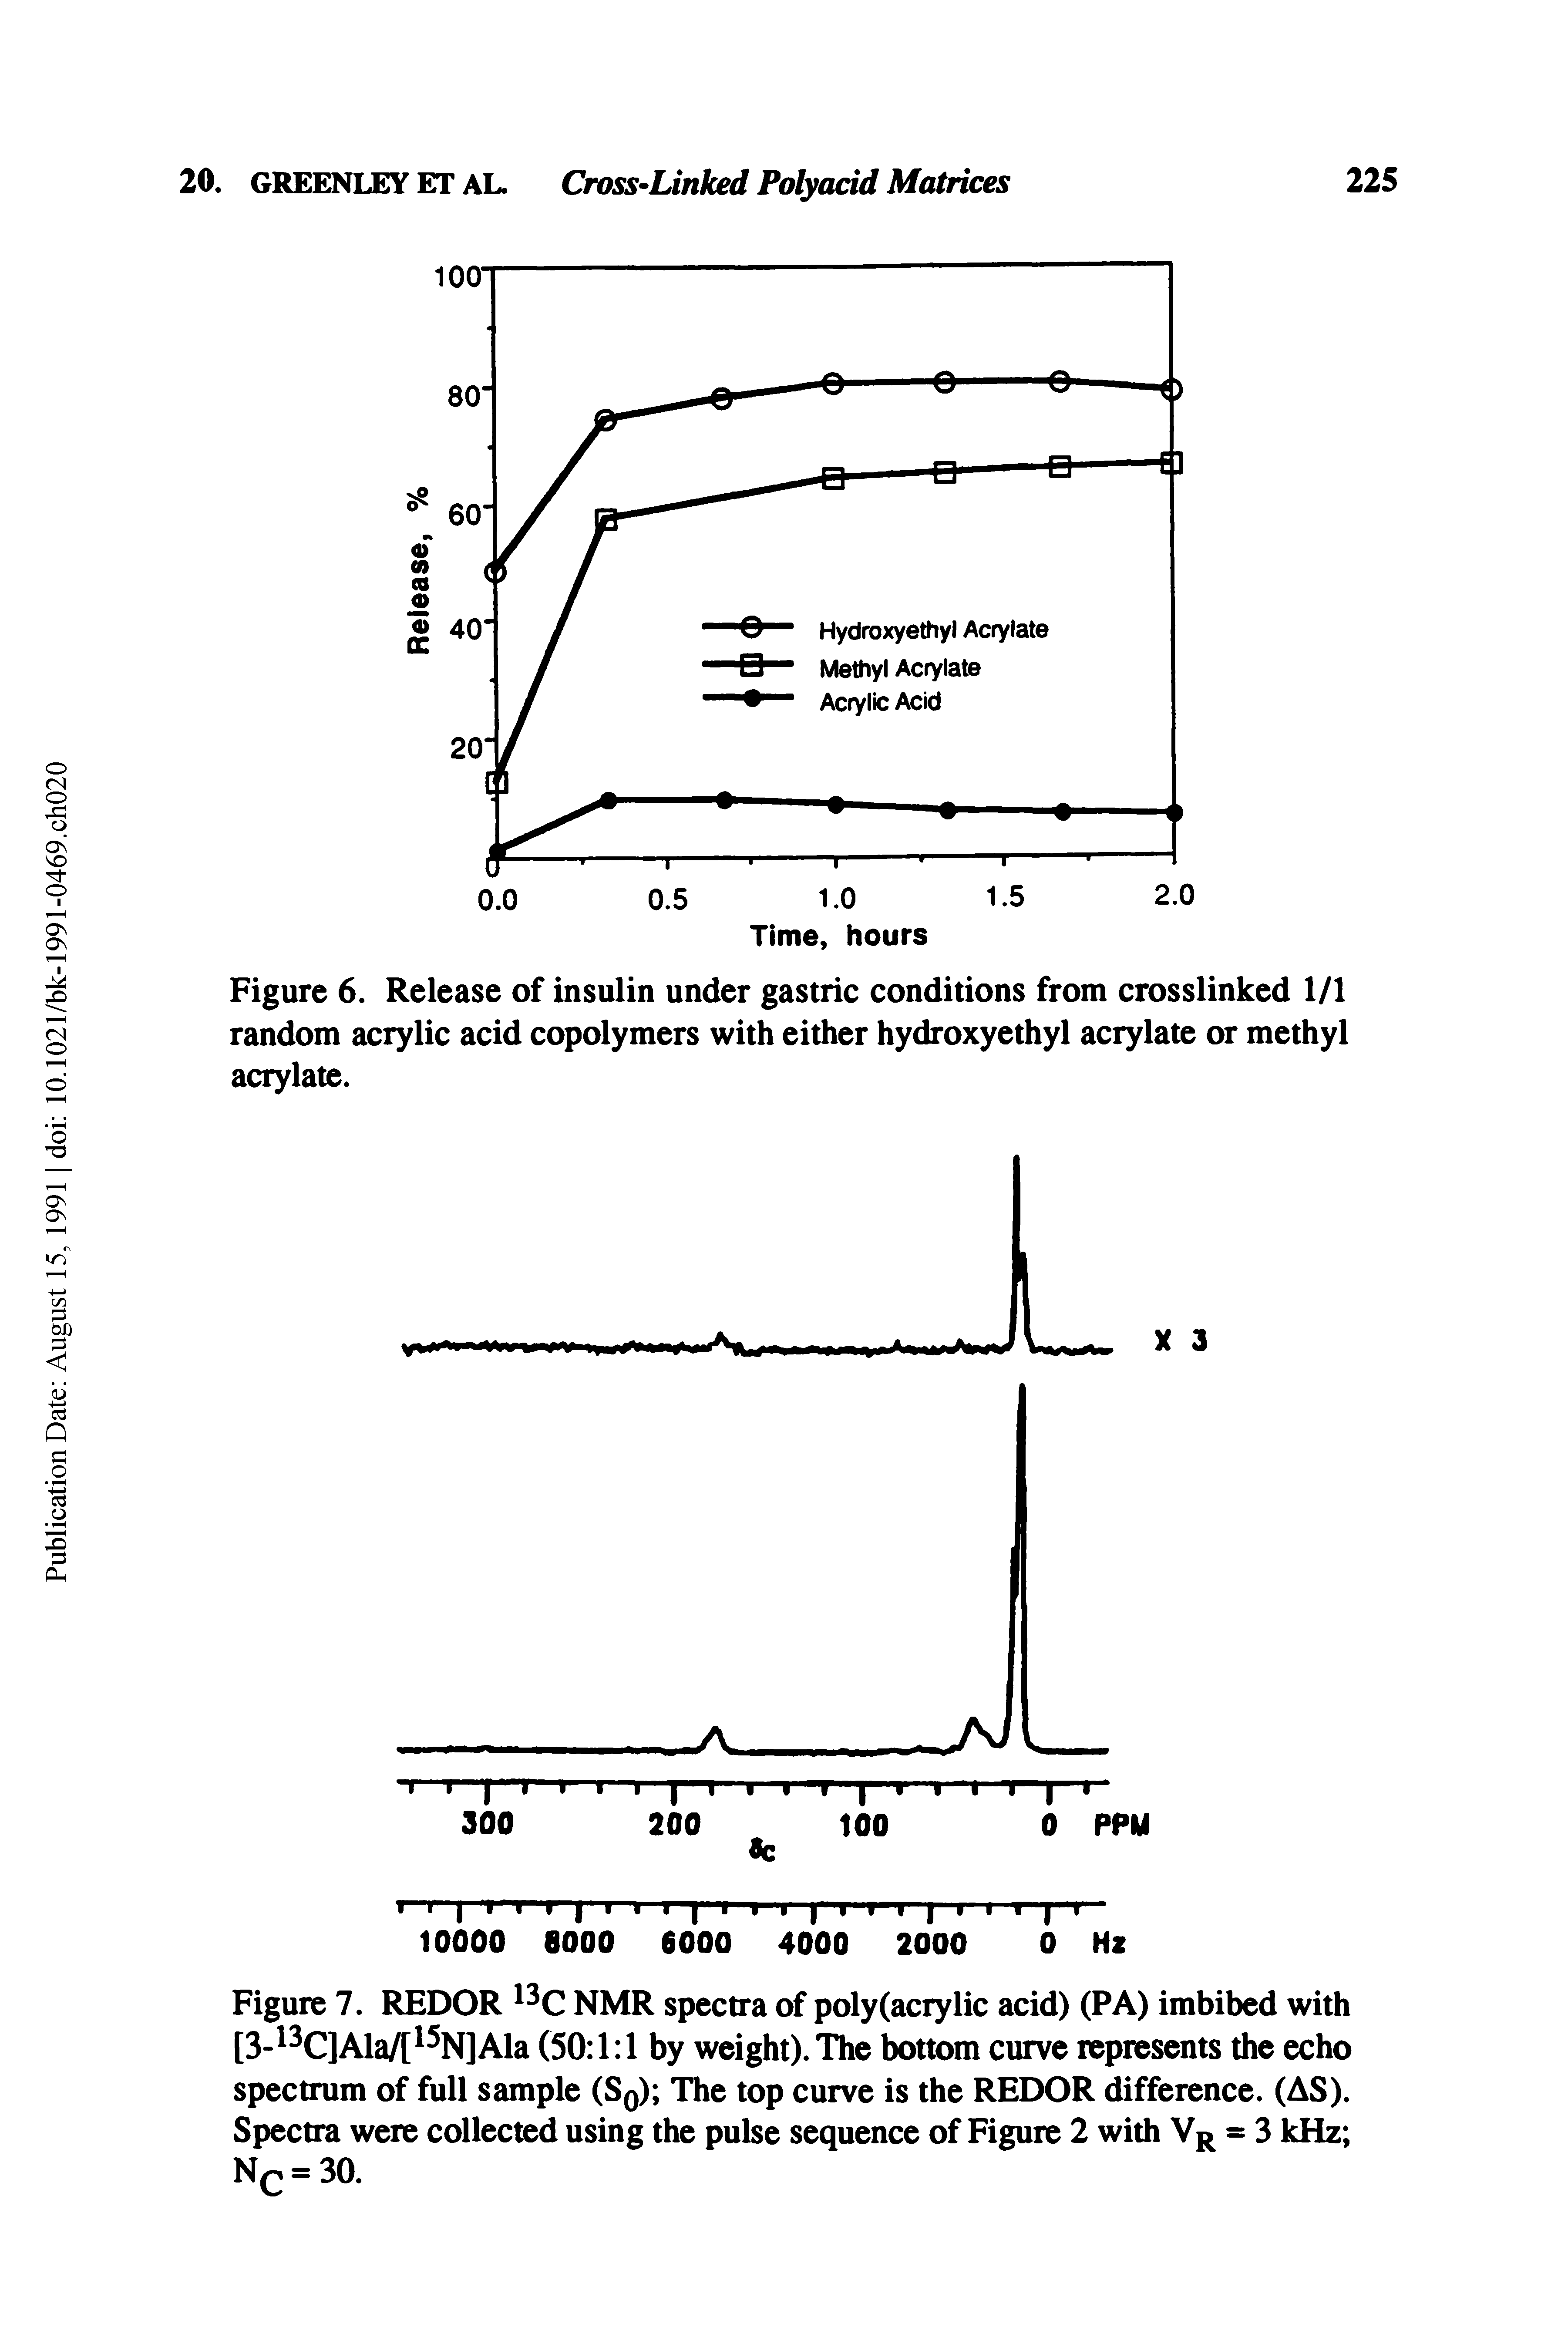 Figure 7. REDOR 13C NMR spectra of poly (aery lie acid) (PA) imbibed with [3-13C]Ala/[15N]Ala (50 1 1 by weight). The bottom curve represents the echo spectrum of full sample (S0) The top curve is the REDOR difference. (AS). Spectra were collected using the pulse sequence of Figure 2 with VR = 3 kHz NC = 30.